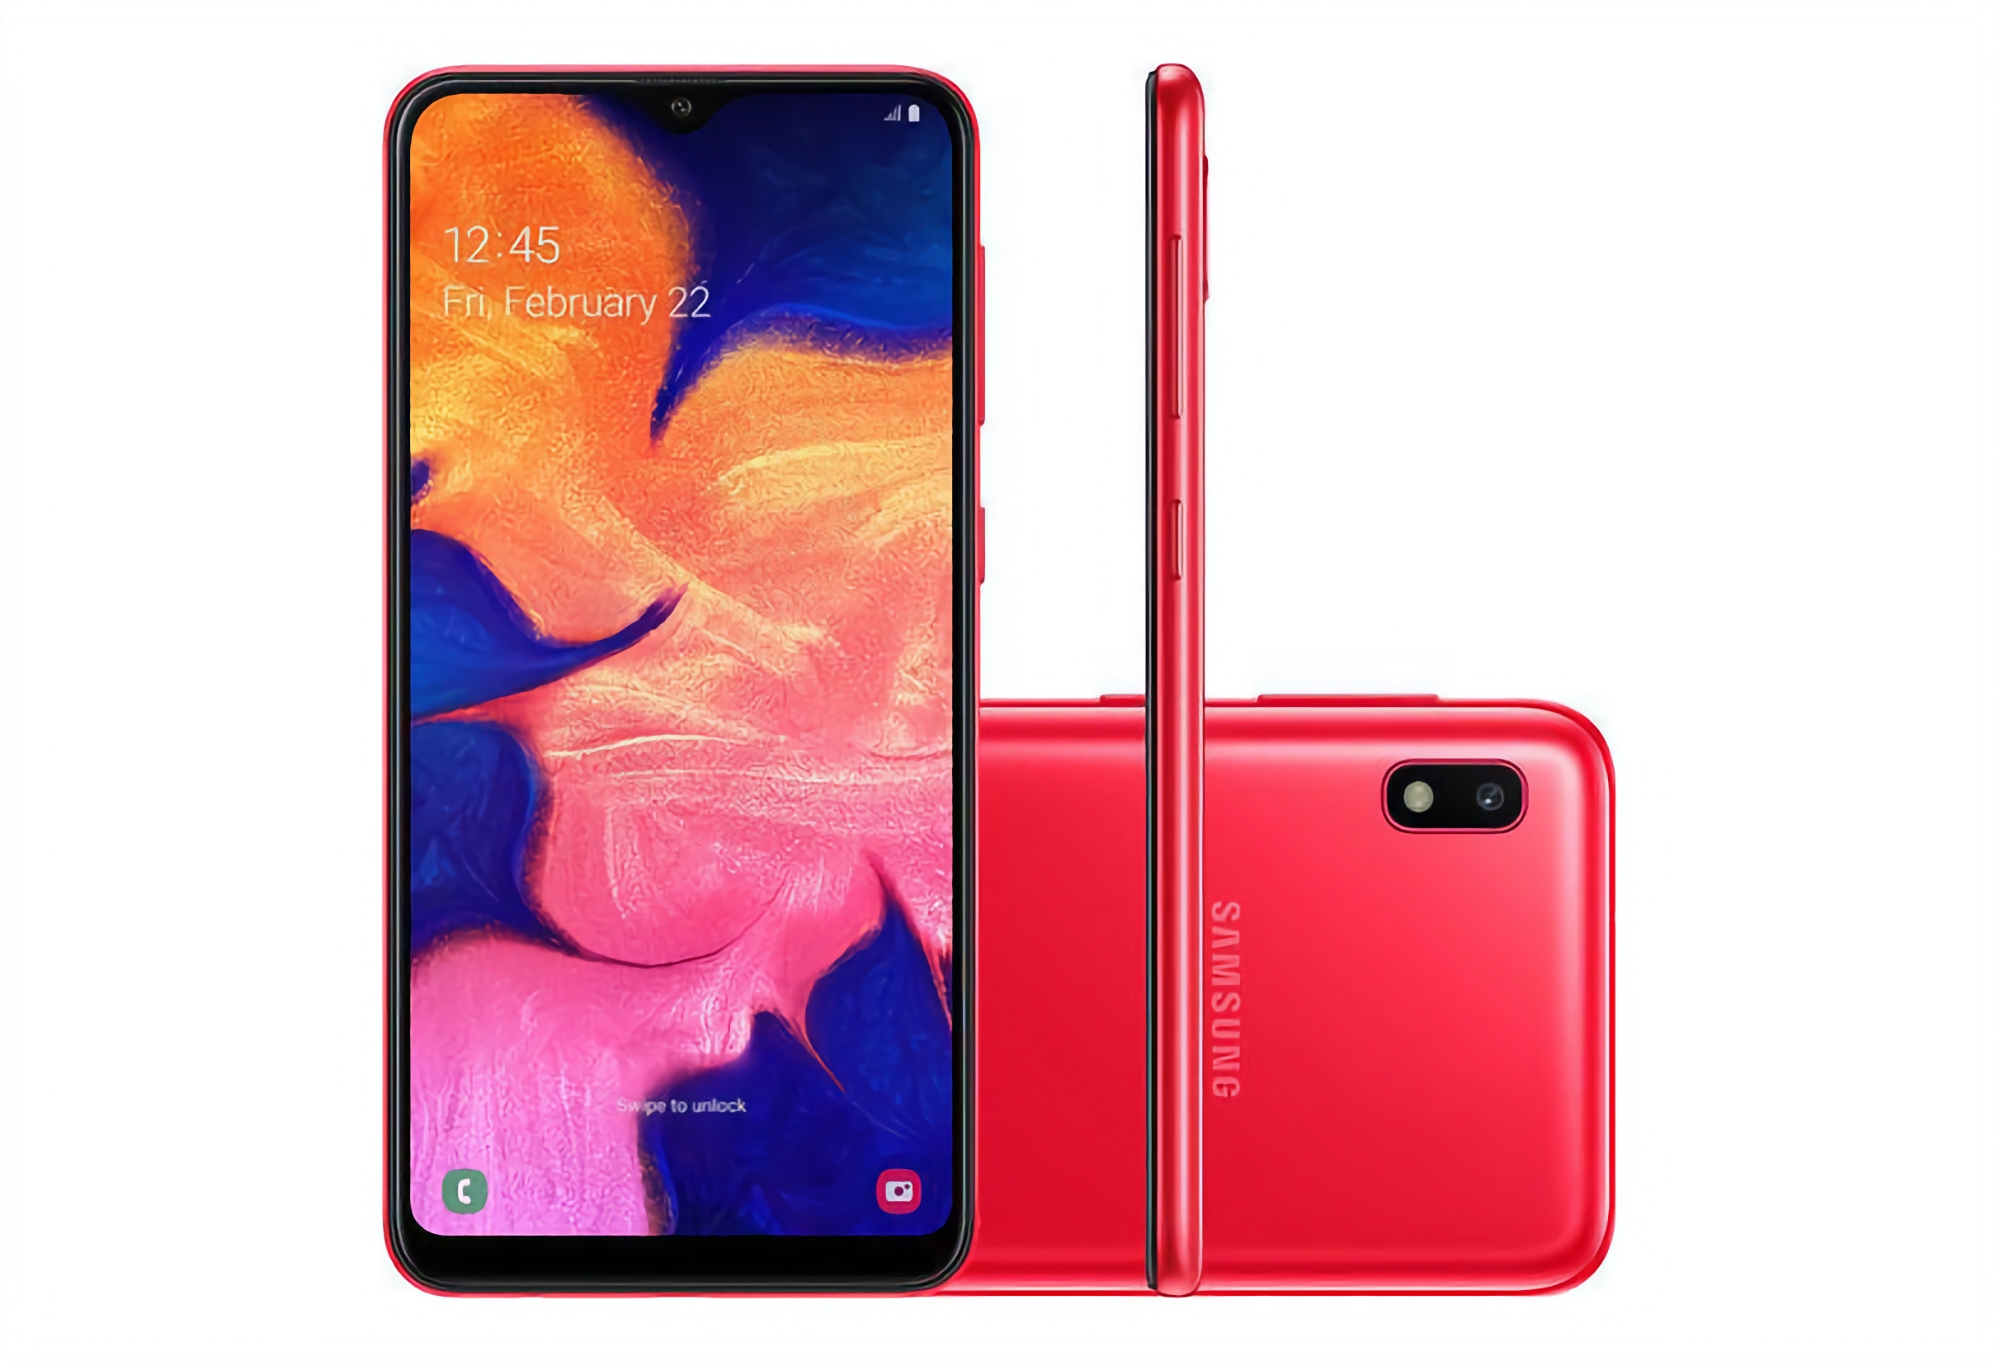 Samsung ends support for Galaxy A10, Galaxy A20, Galaxy A40 and three tablet models